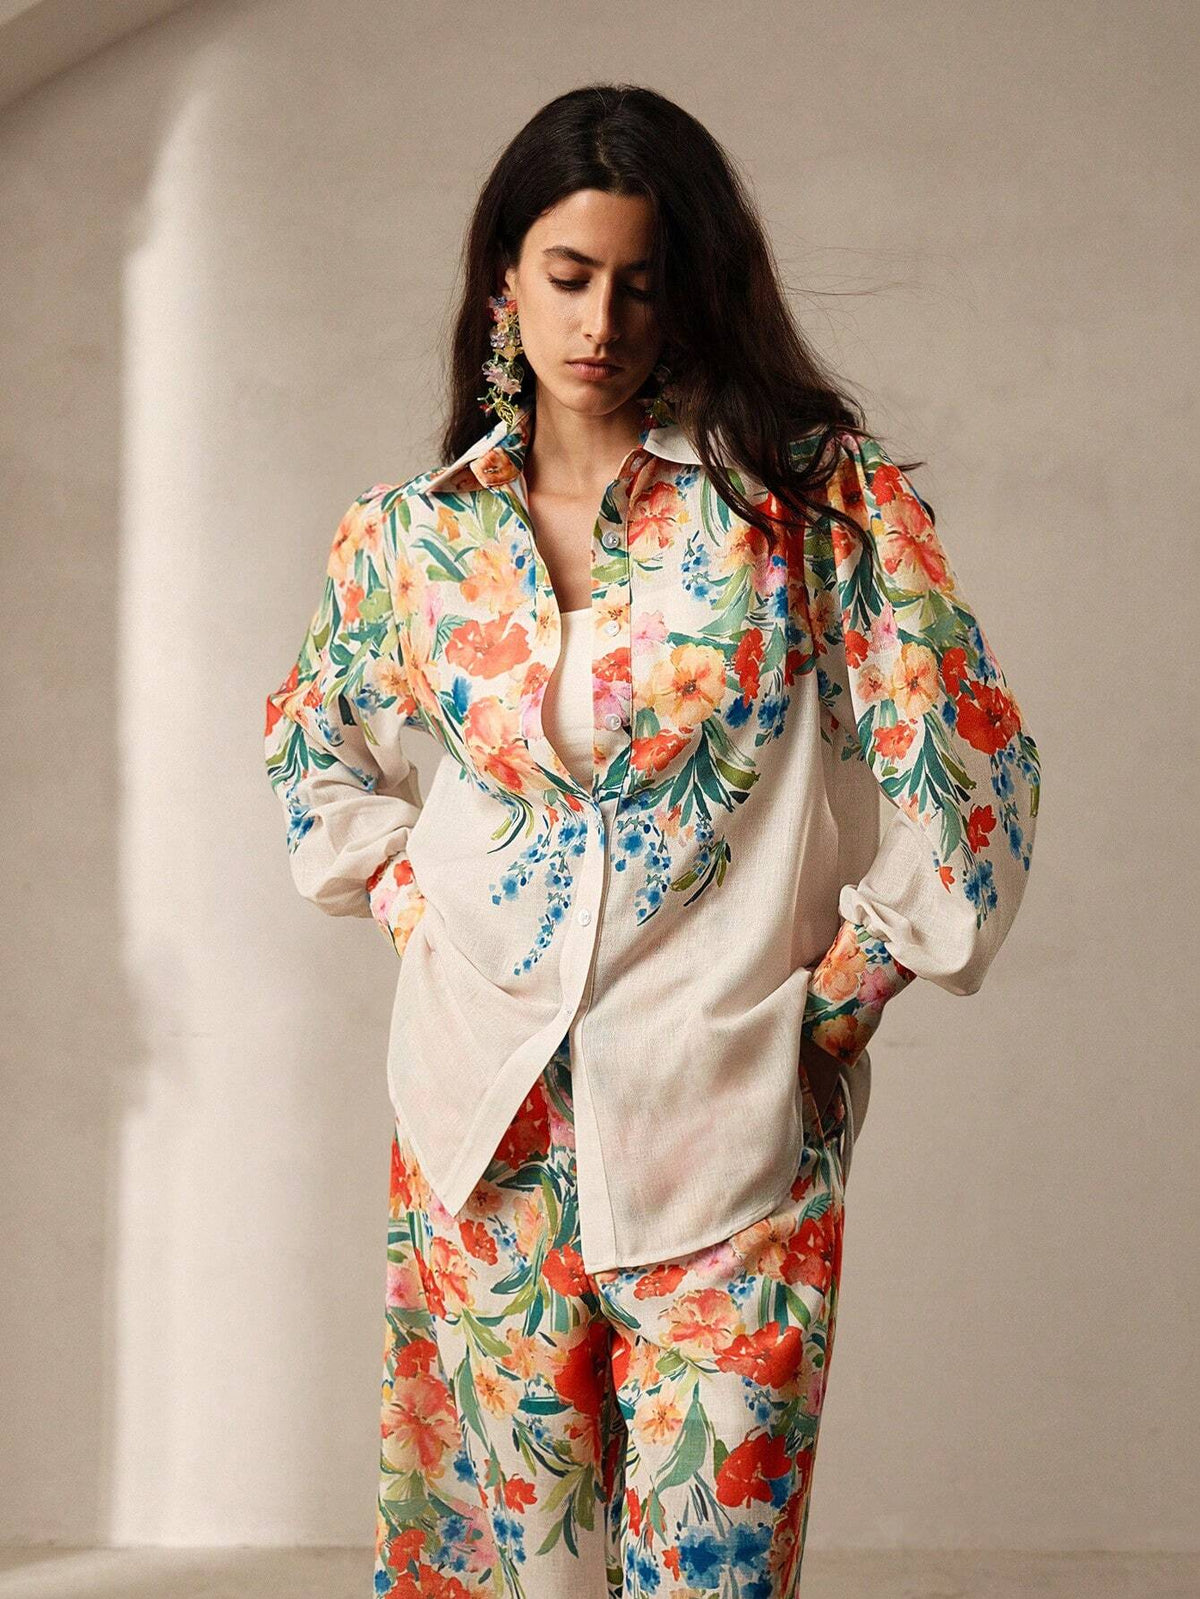 Anewsta Romantic Floral Print Women Shirt And Pants Two Piece Set For Vacation